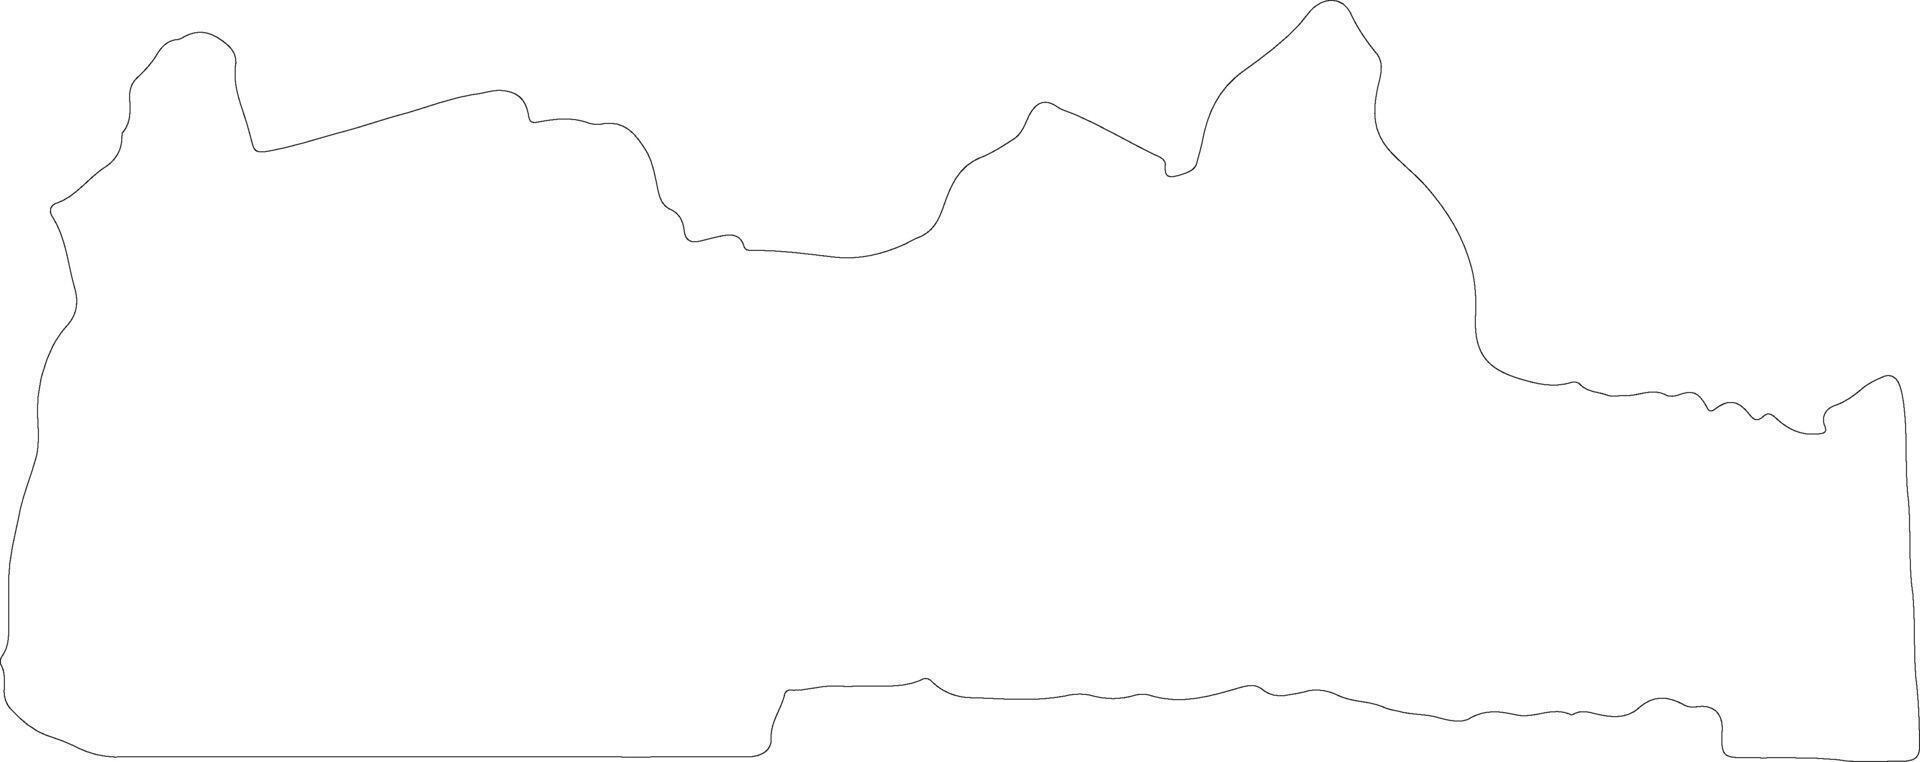 Sud Cameroon outline map vector